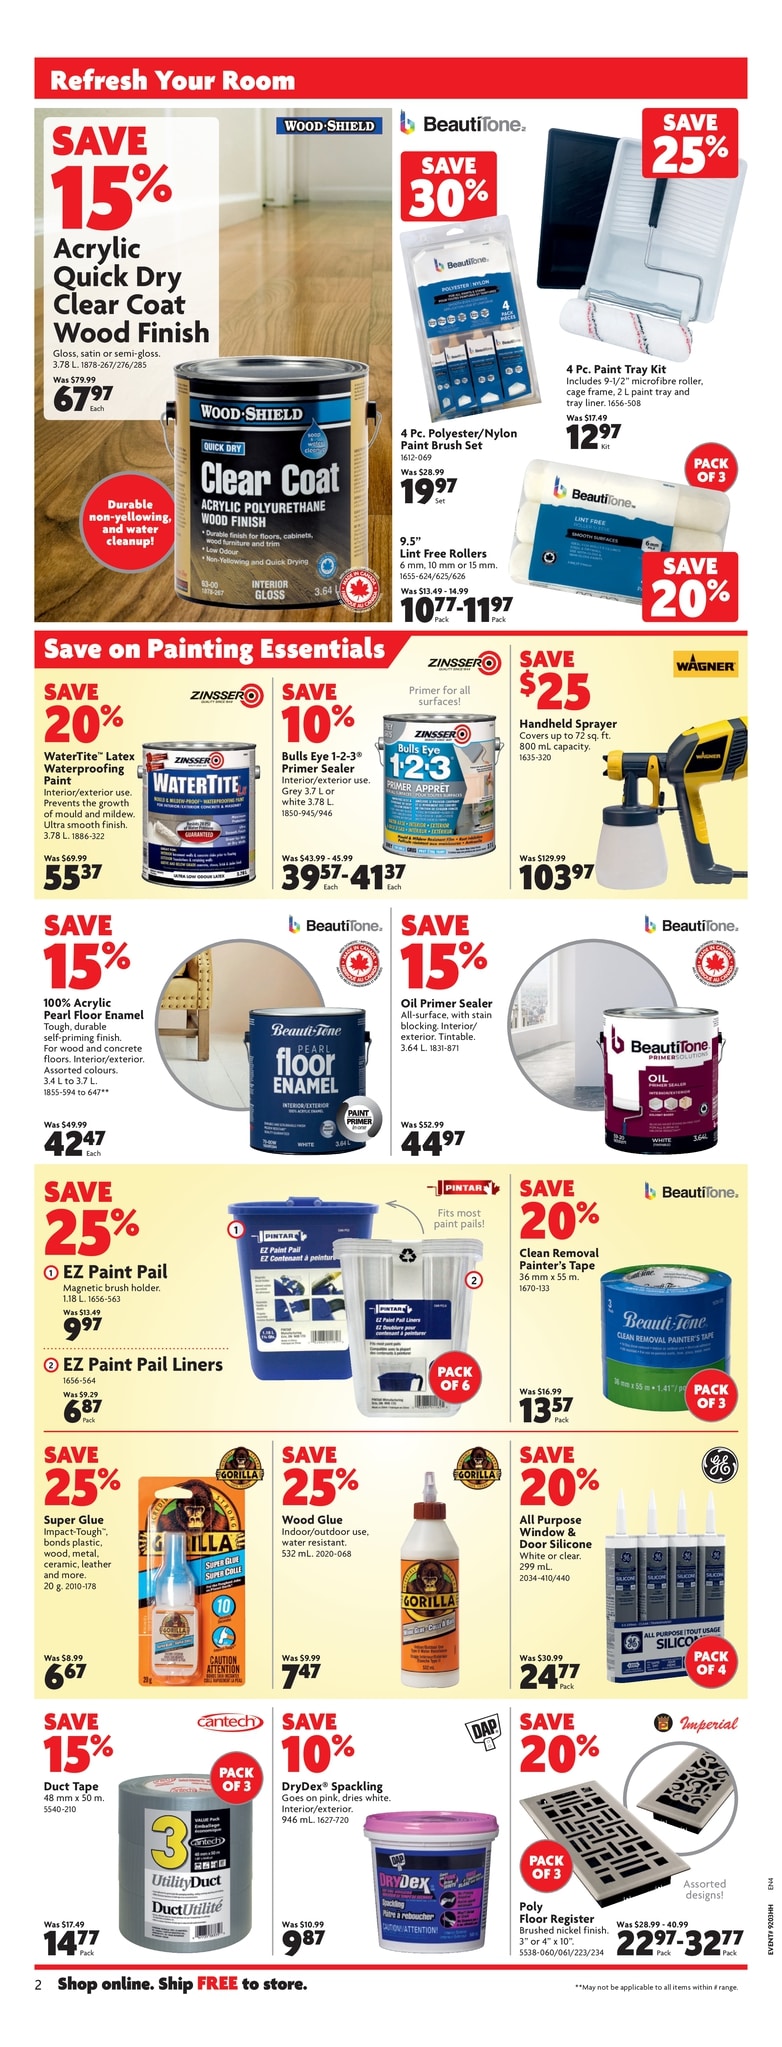 Home Hardware - Weekly Flyer Specials - Page 3